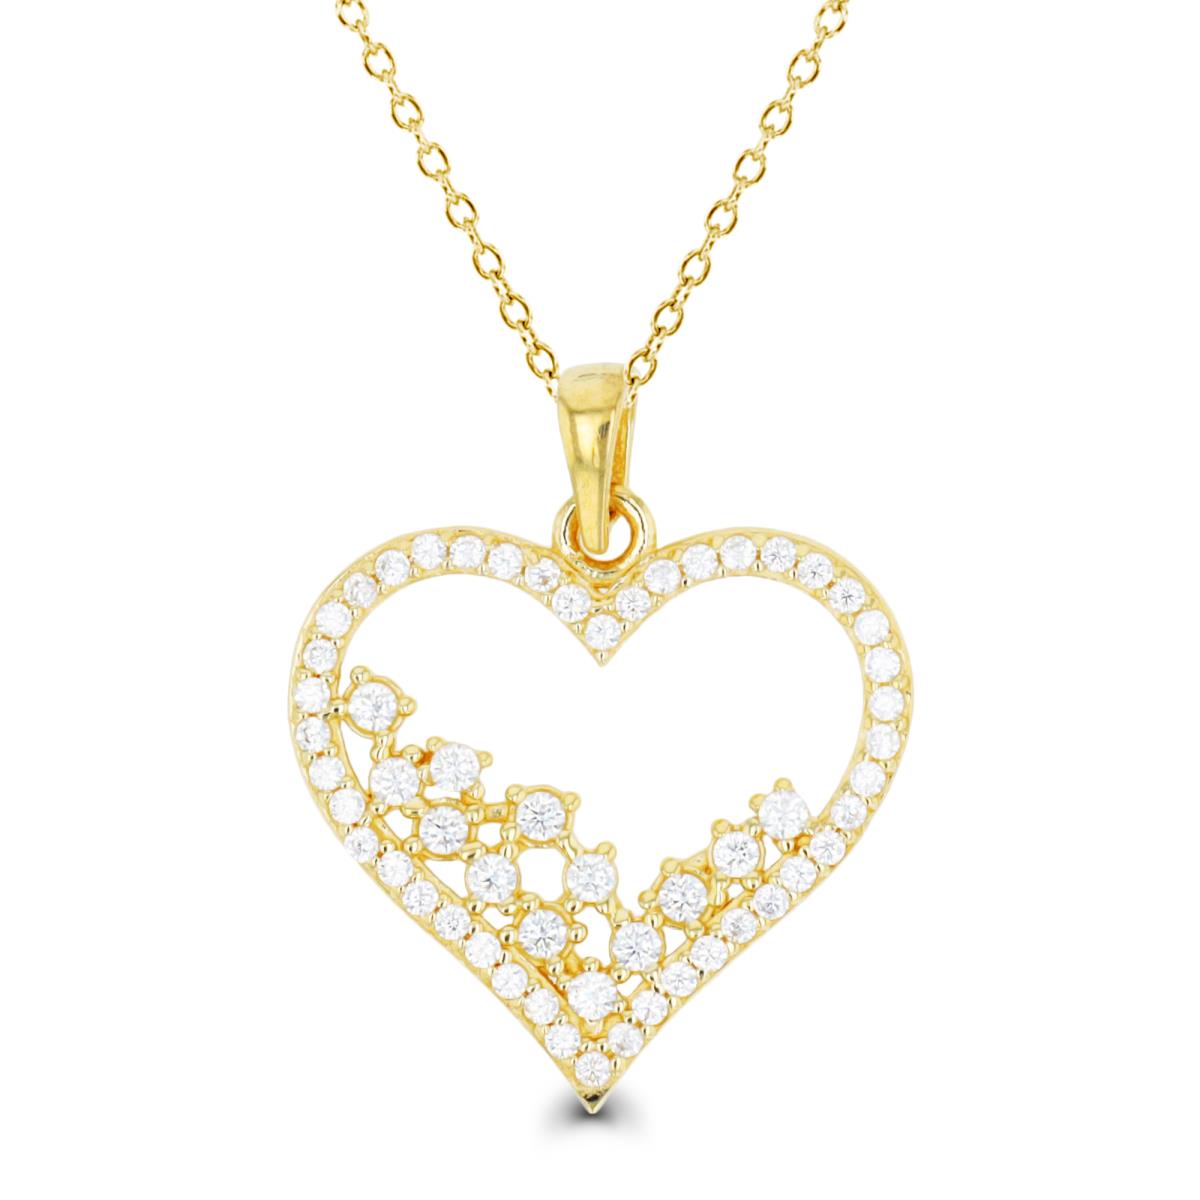 10K Yellow Gold Heart 18" Necklace